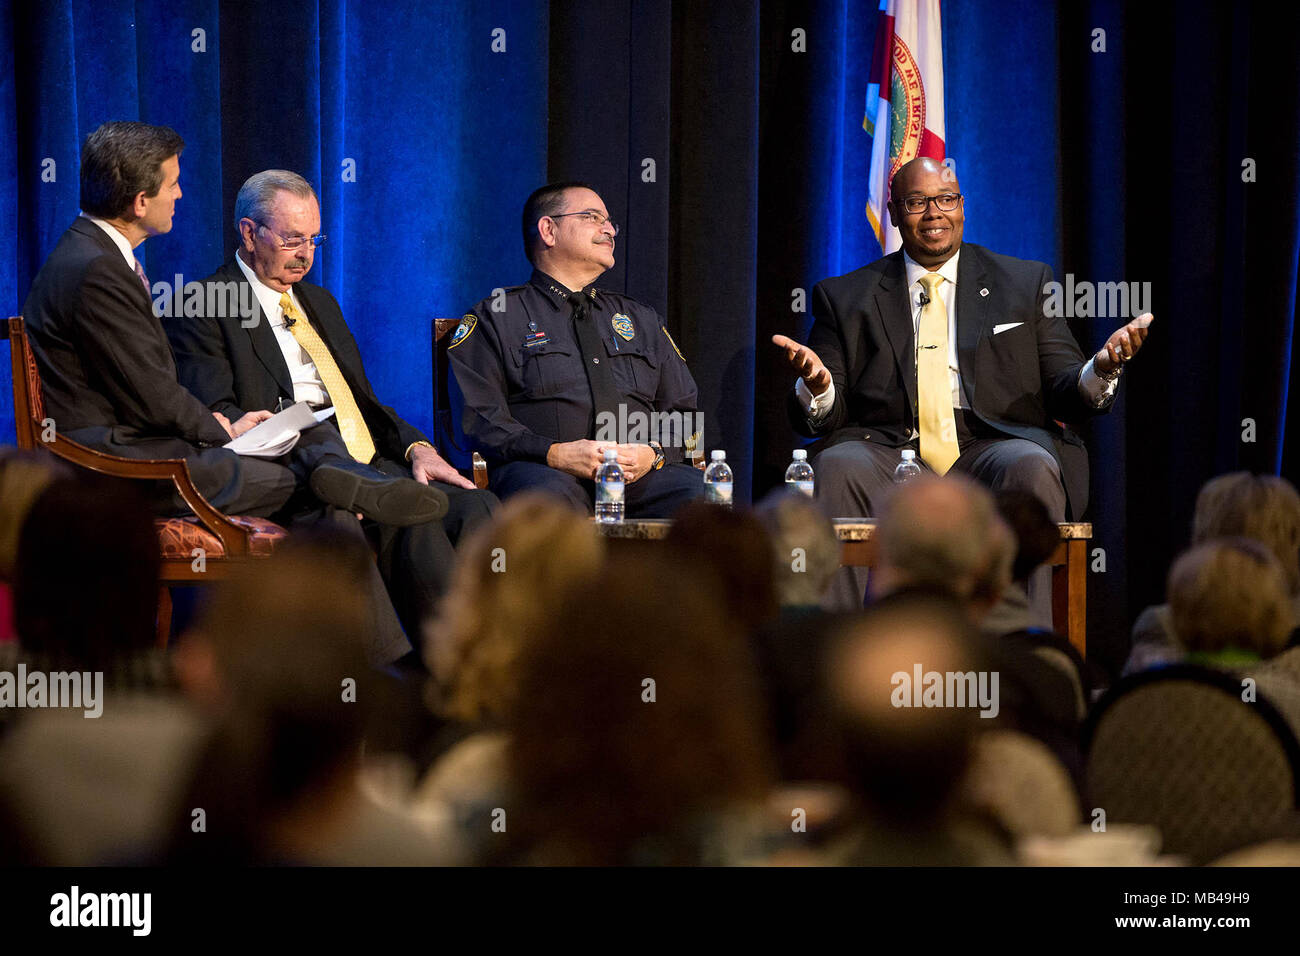 Boynton Beach, Florida, USA. 6th Apr, 2018. WPTVÃ¢â‚¬â„¢s Michael Williams moderates a discussion between Sheriff Ric Bradshaw, School District Police Chief Lawrence J. Leon and Palm Beach County Superintendent Dr. Donald E. Fennoy II, at the Forum Club luncheon at the Kravis Center Cohen Pavilion in West Palm Beach, Florida on April 6, 2018. Credit: Allen Eyestone/The Palm Beach Post/ZUMA Wire/Alamy Live News Stock Photo